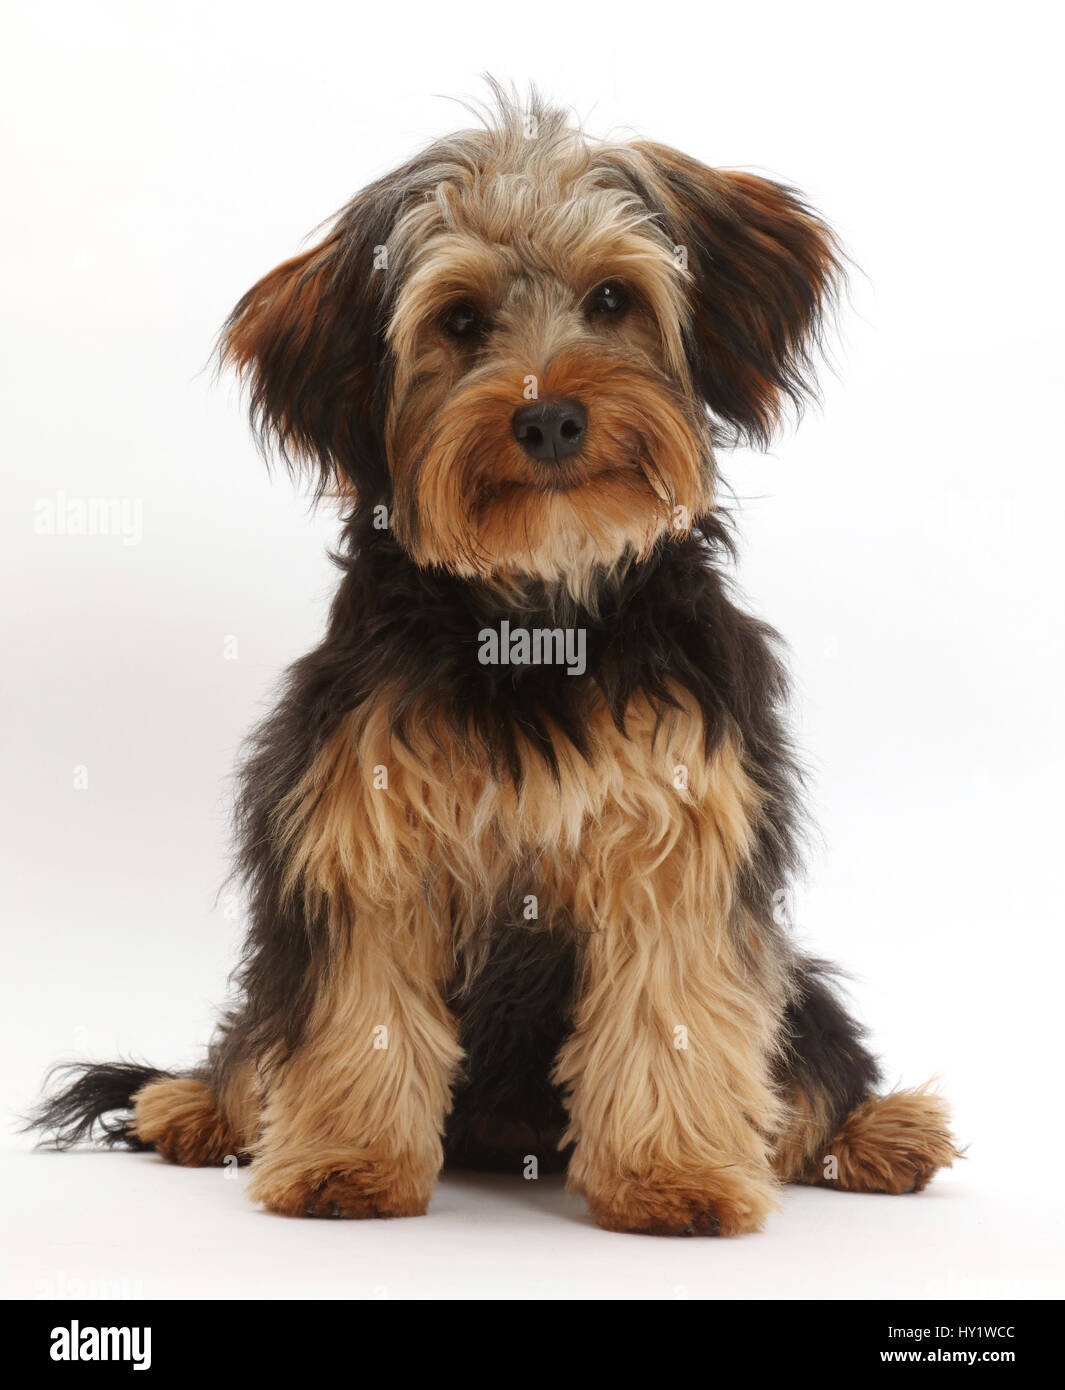 Yorkipoo dog, Yorkshire terrier cross Poodle, Oscar, age 6 months. Stock Photo